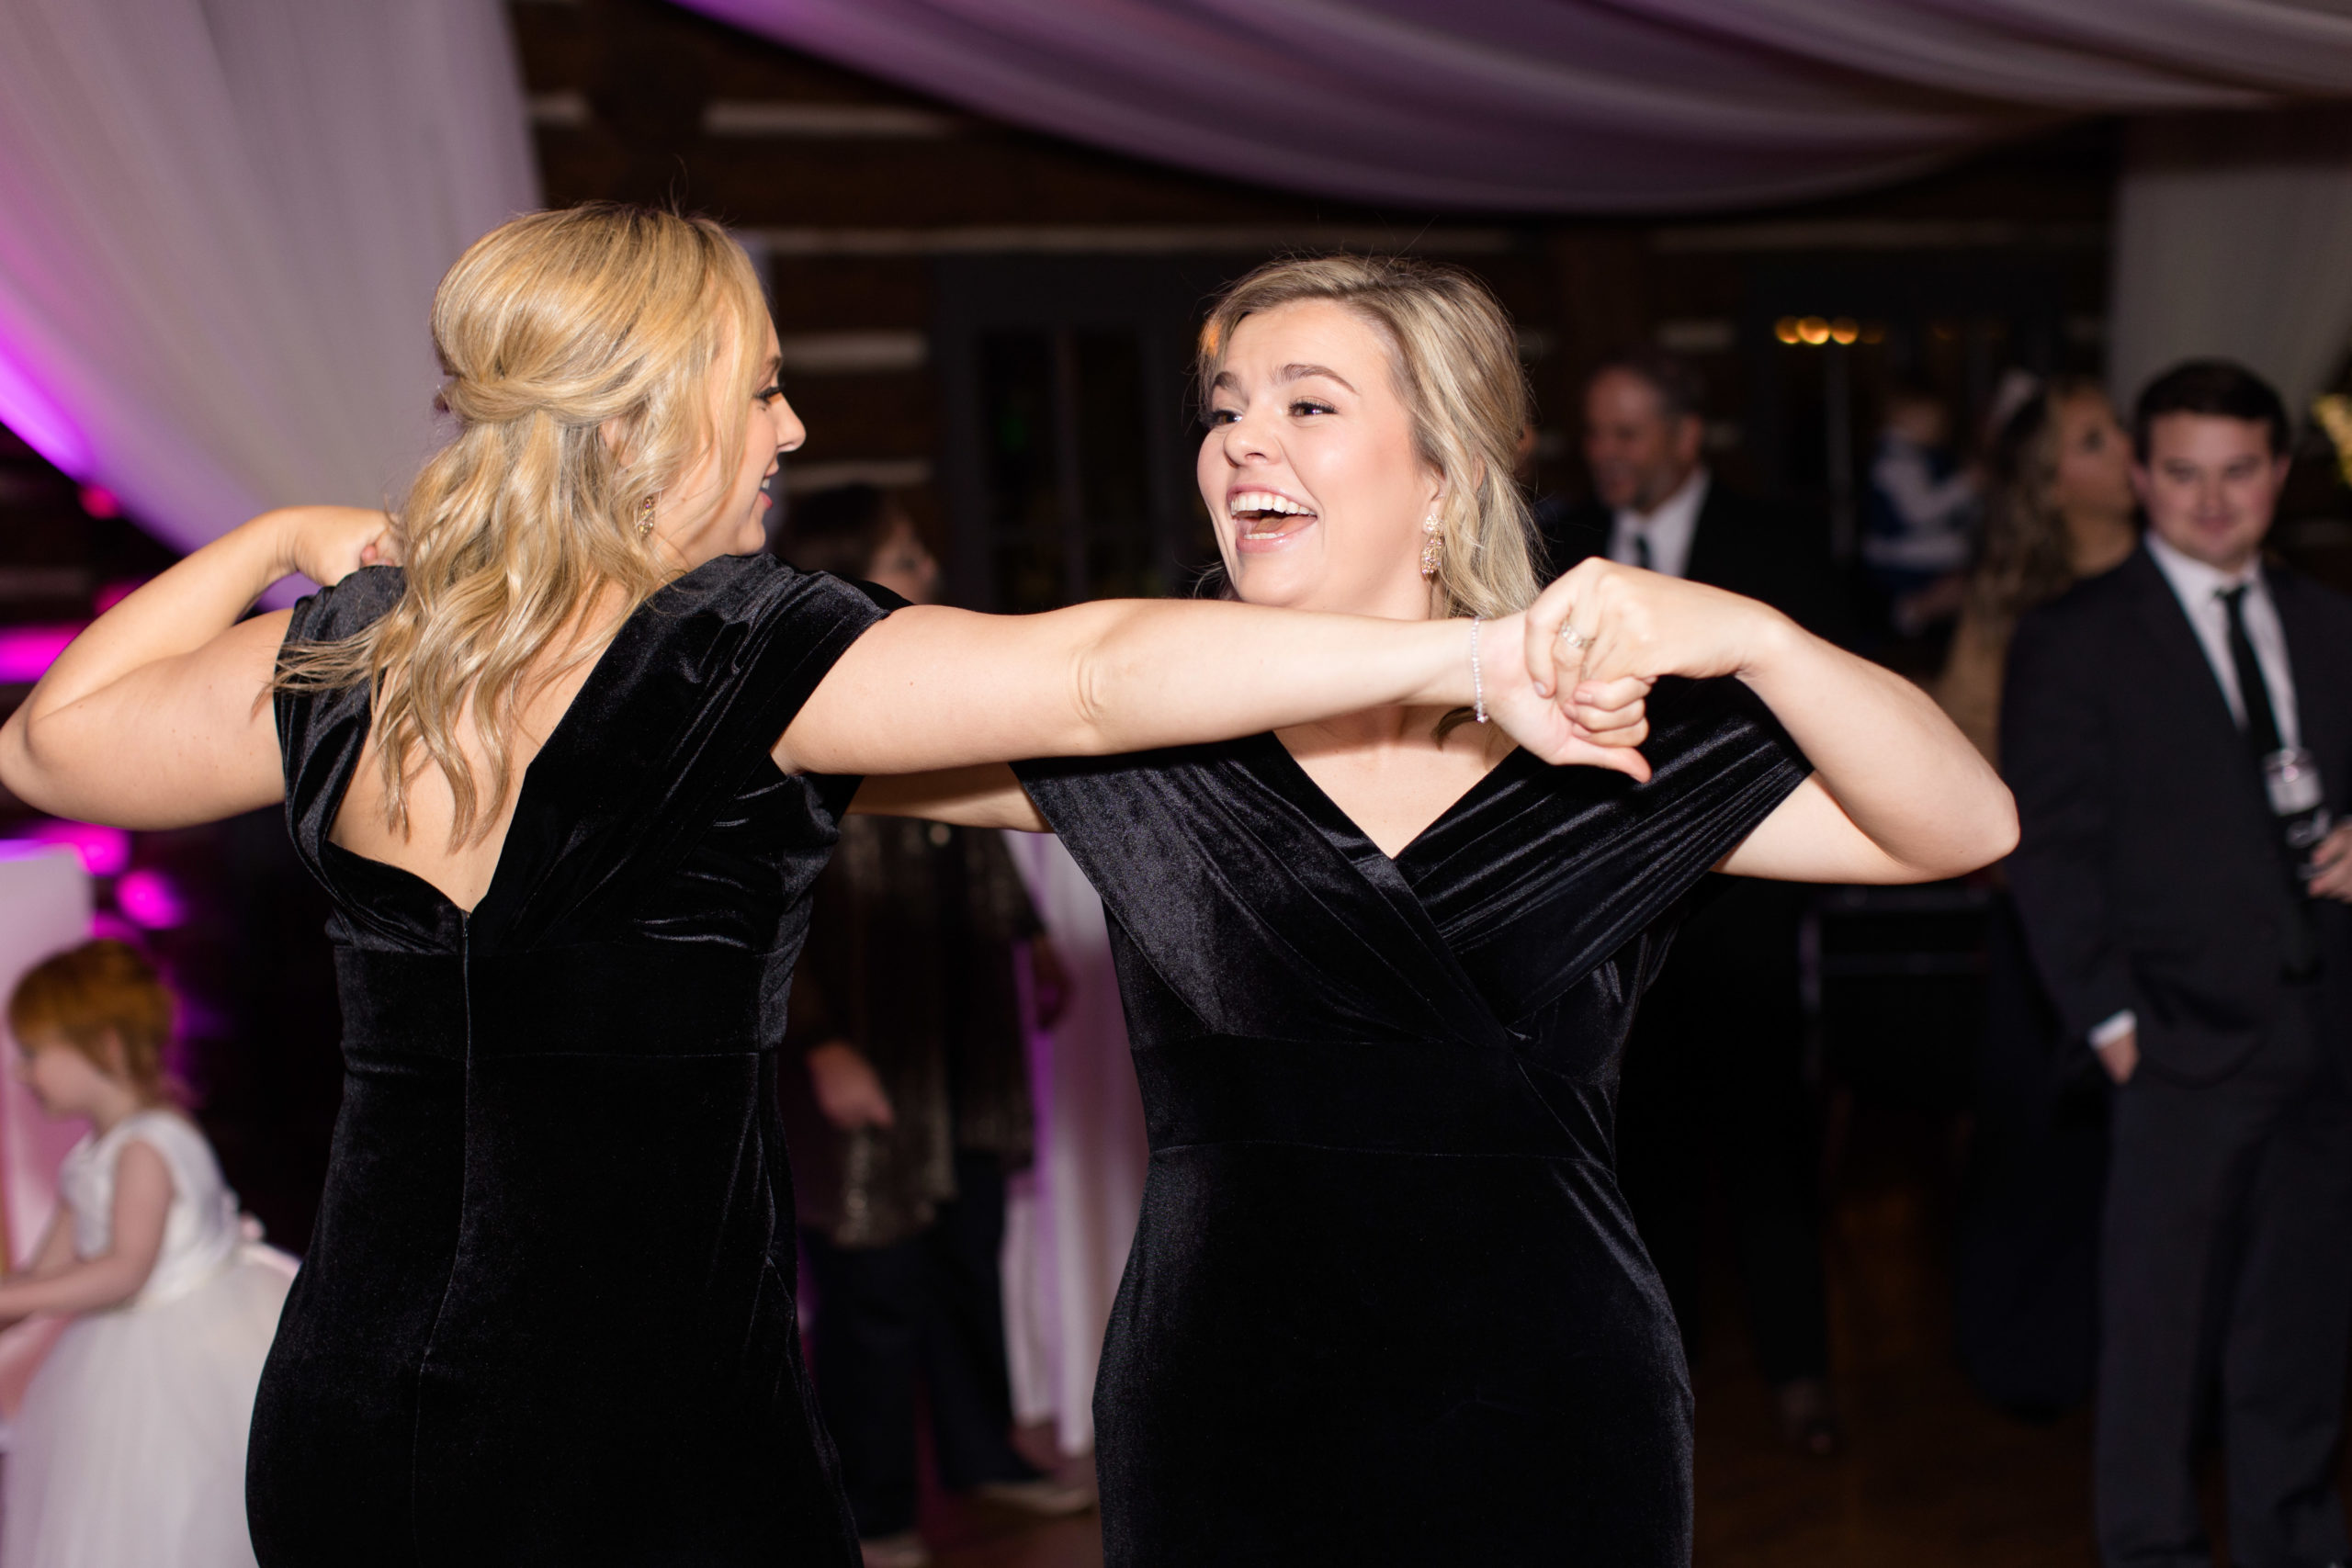 Bridesmaids dance together at reception.